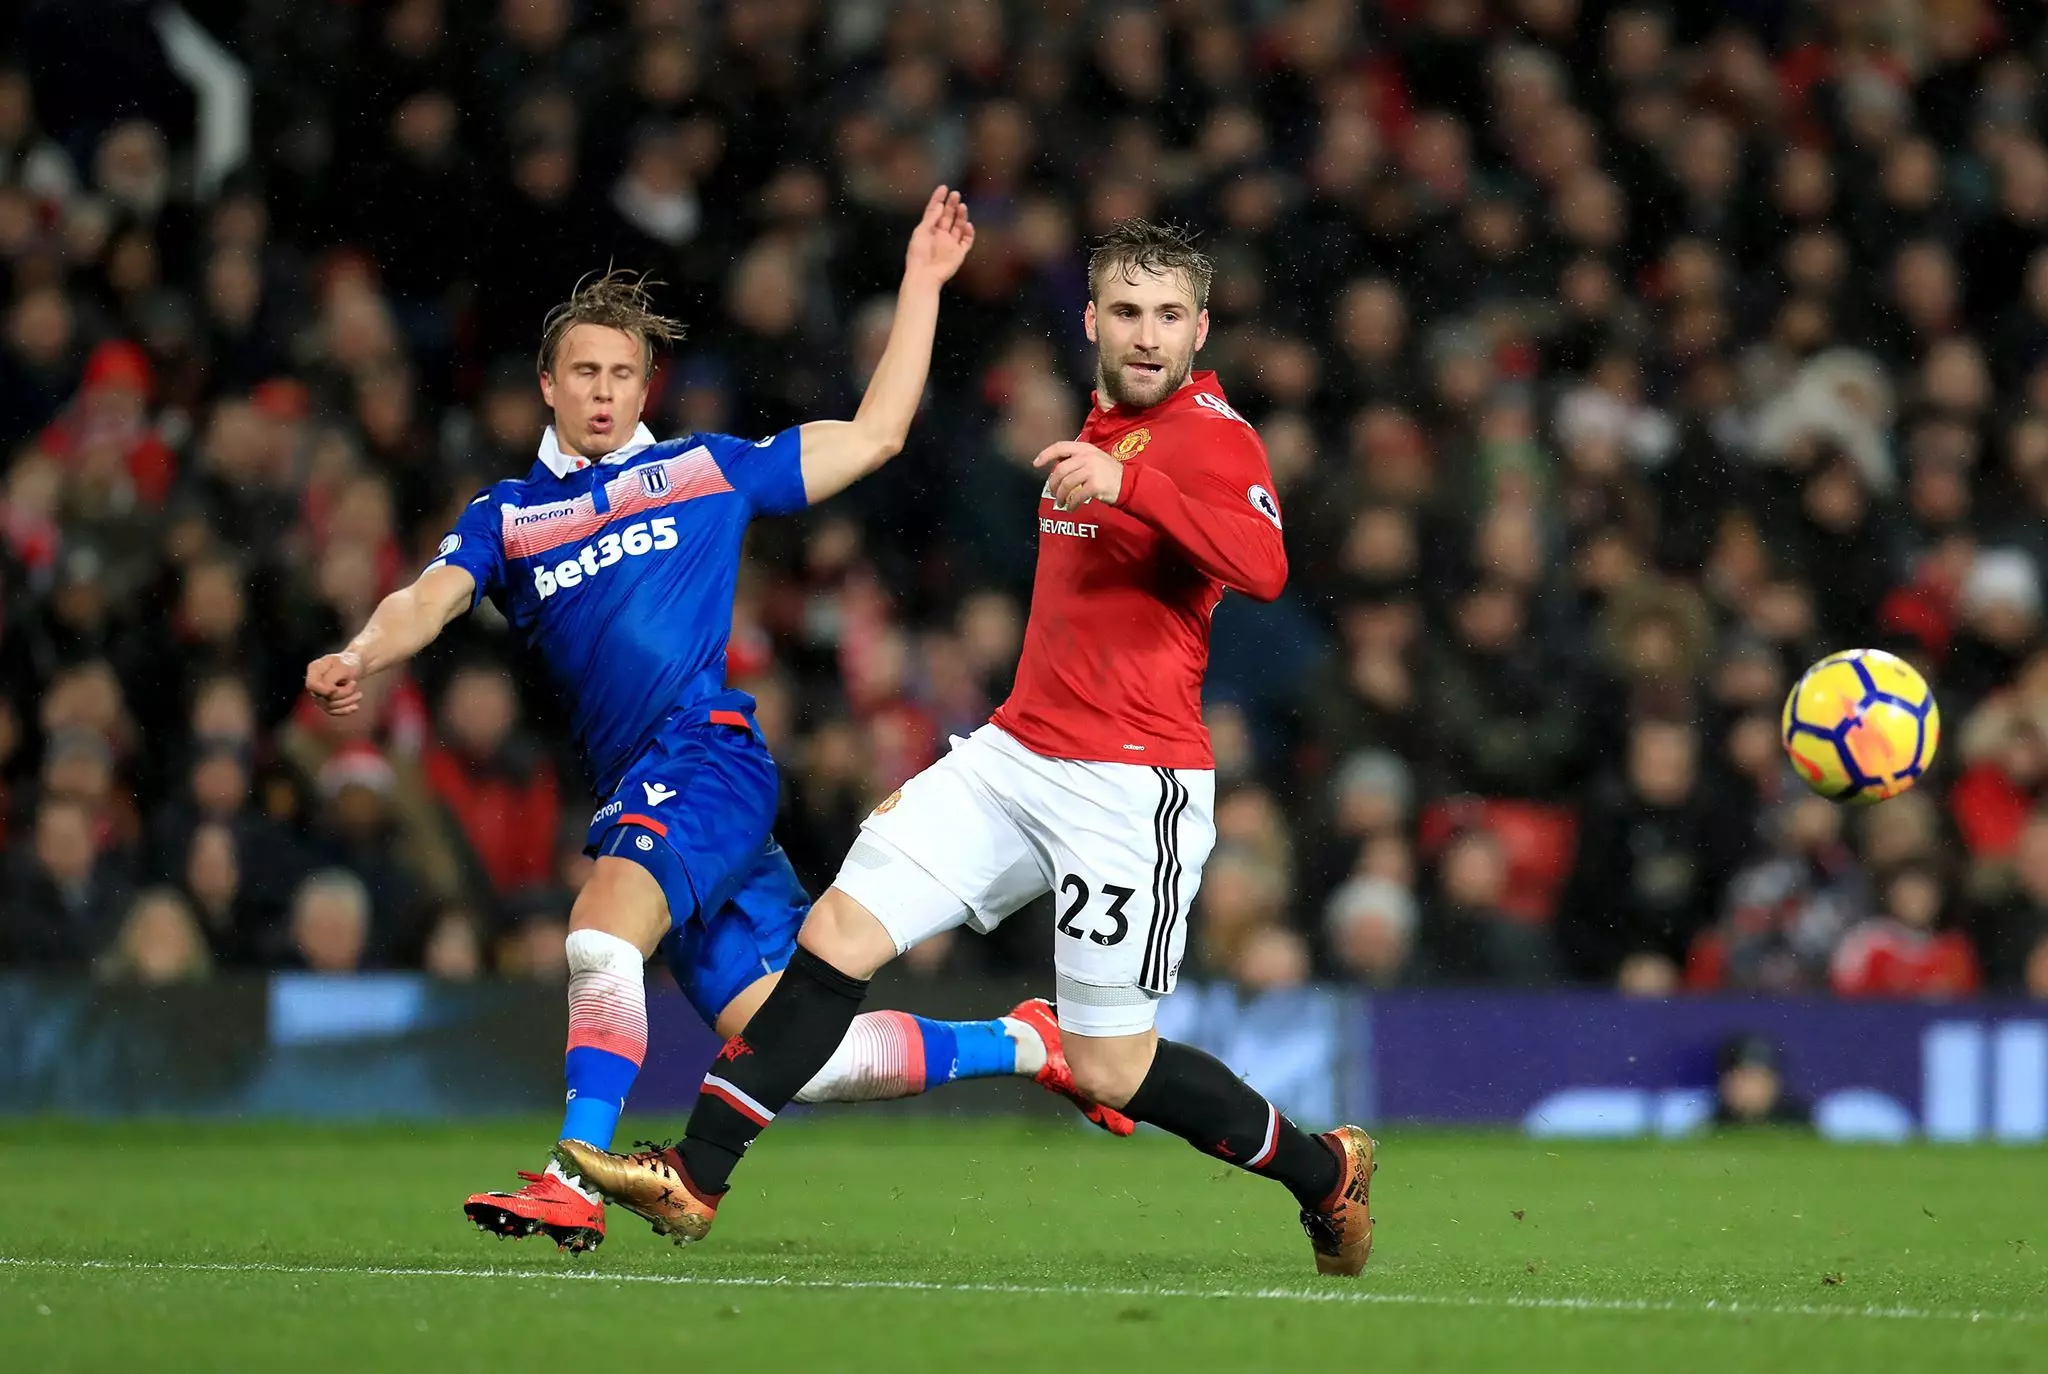 It will come as a surprise to no one to see Shaw leave this summer. Image: PA Images